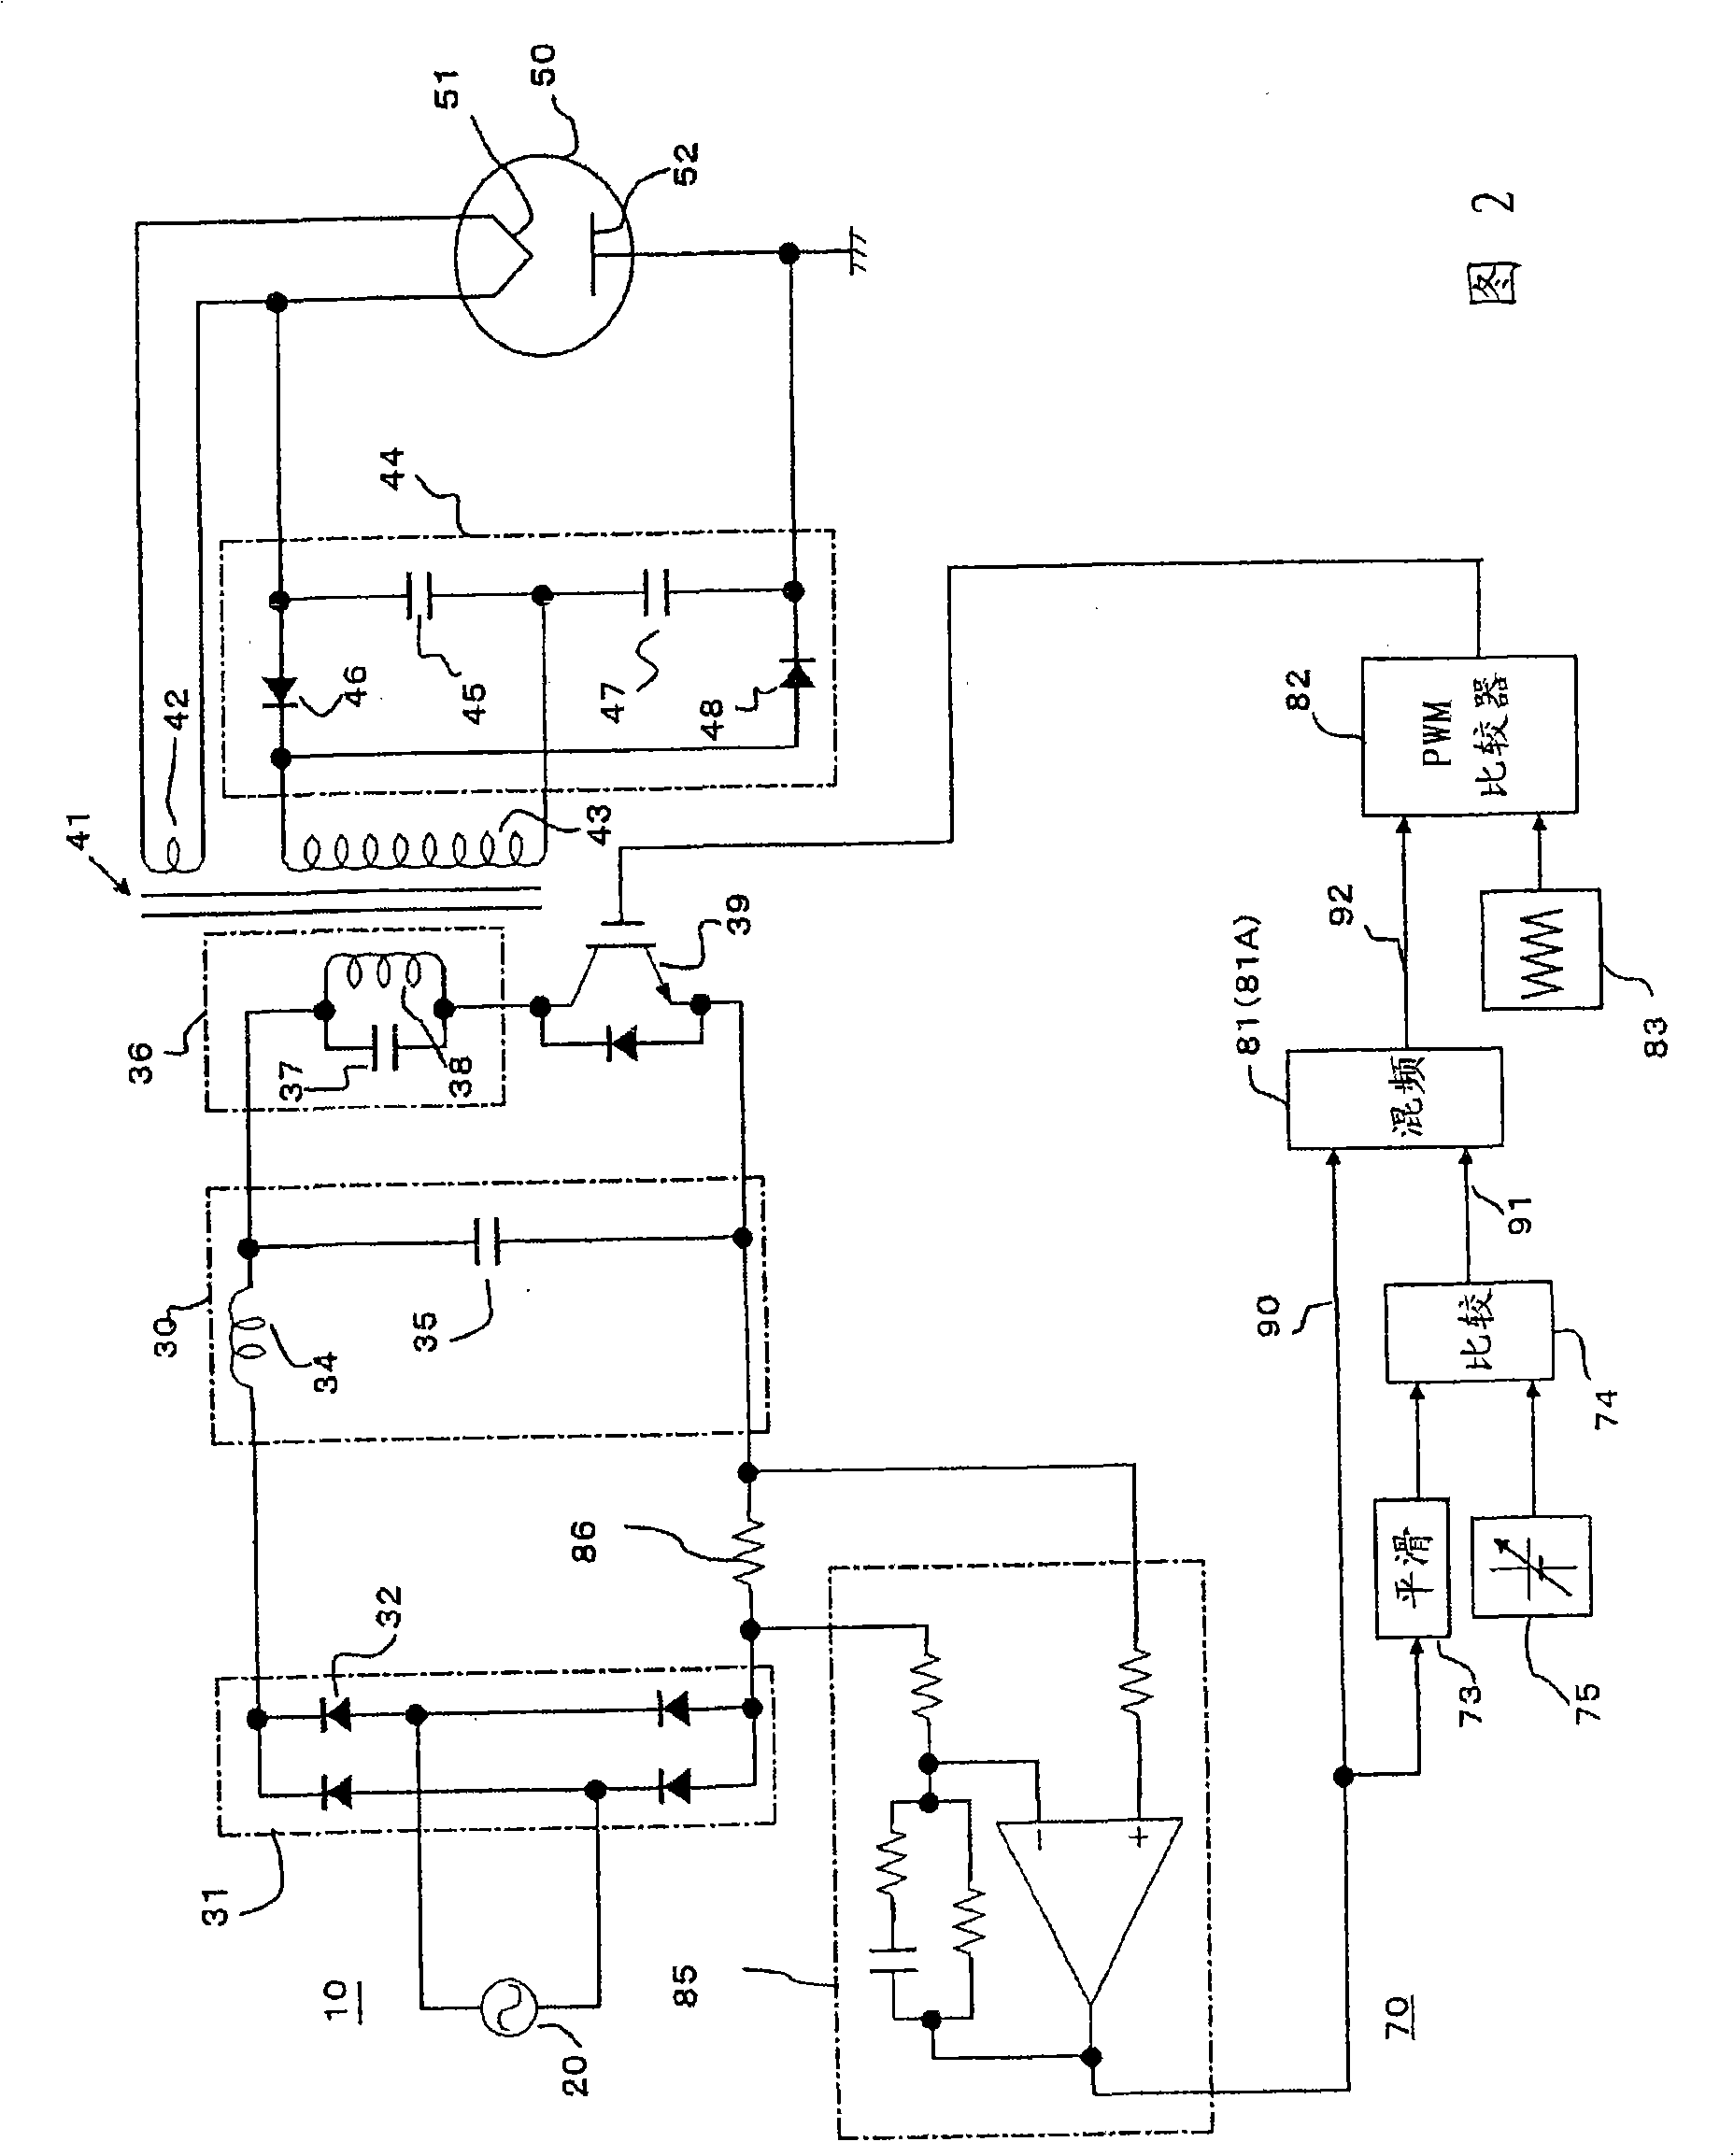 Power control device for high-frequency dielectric heating and its control method